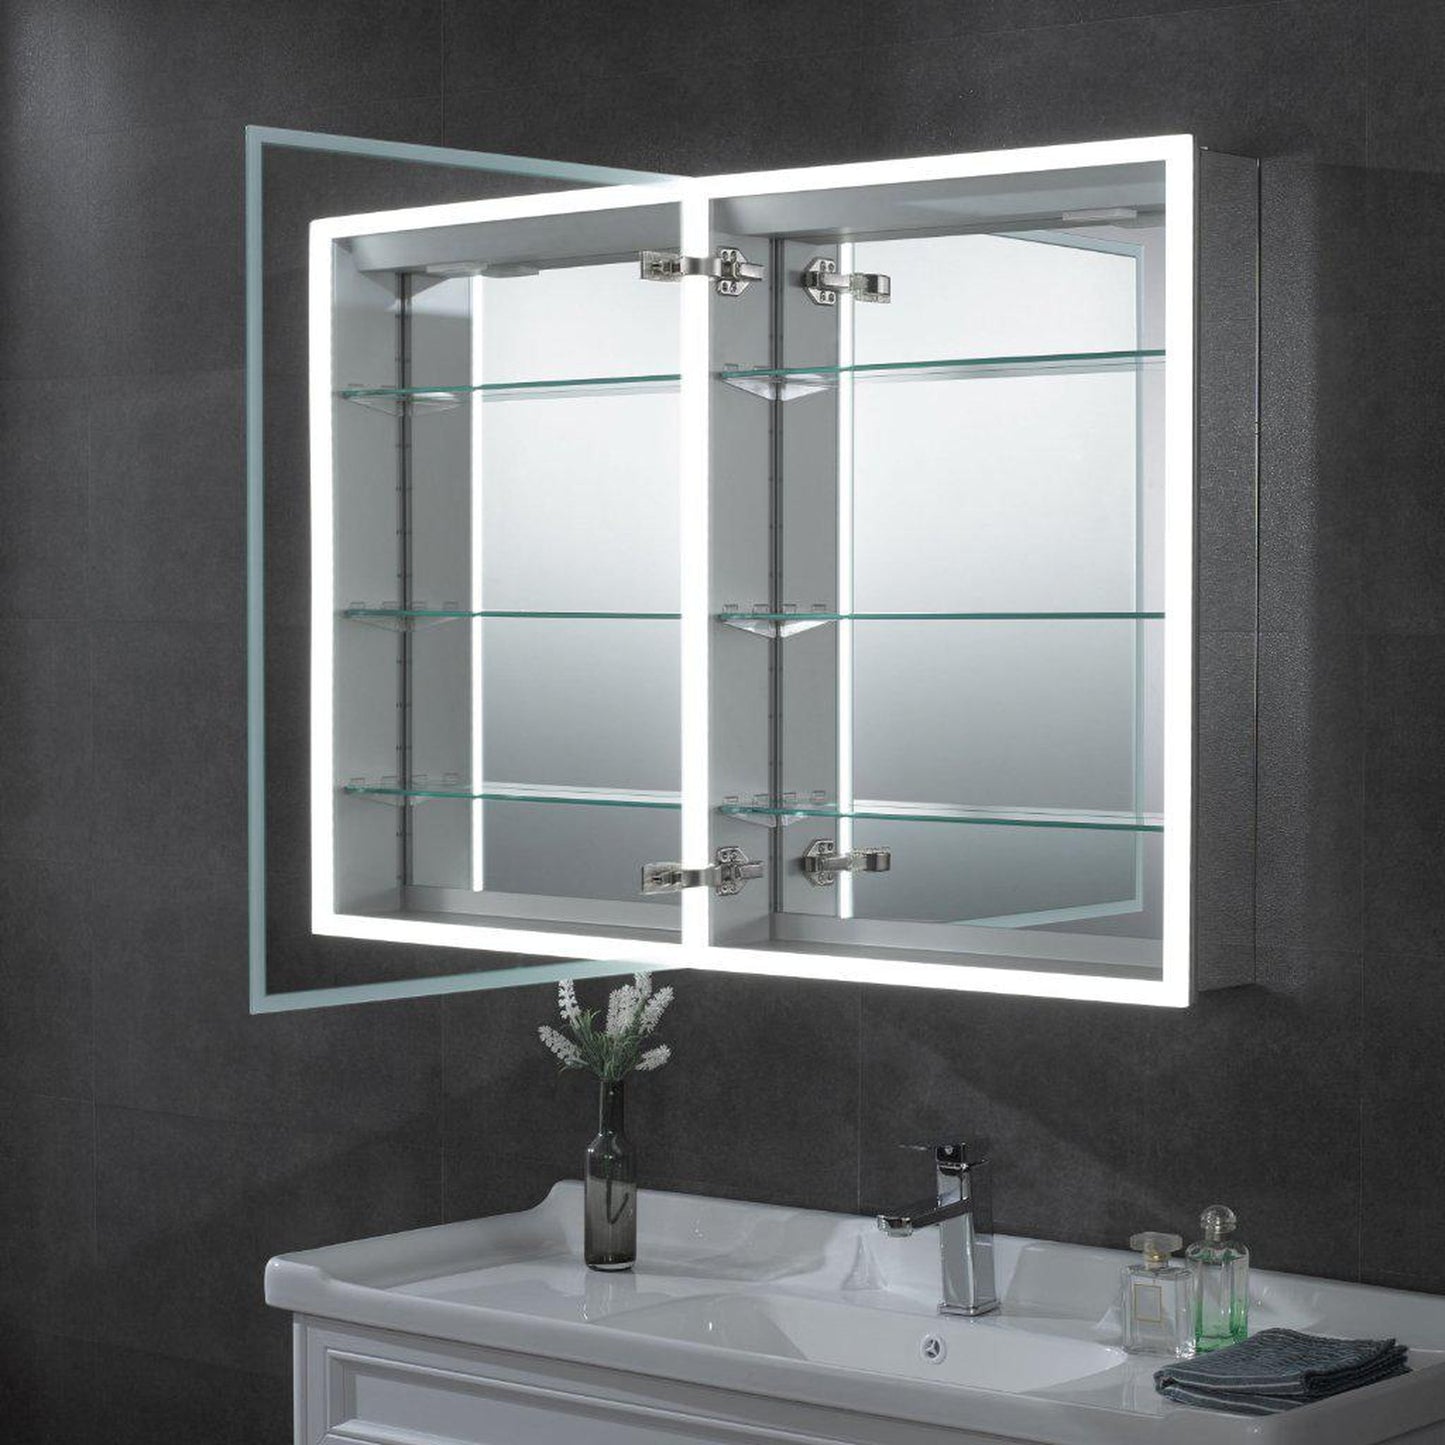 ALFI Brand ABMC2432 24" x 32" LED Lighted Hinged Single Door Framed Mirror Medicine Cabinet With Tempered Glass Shelves